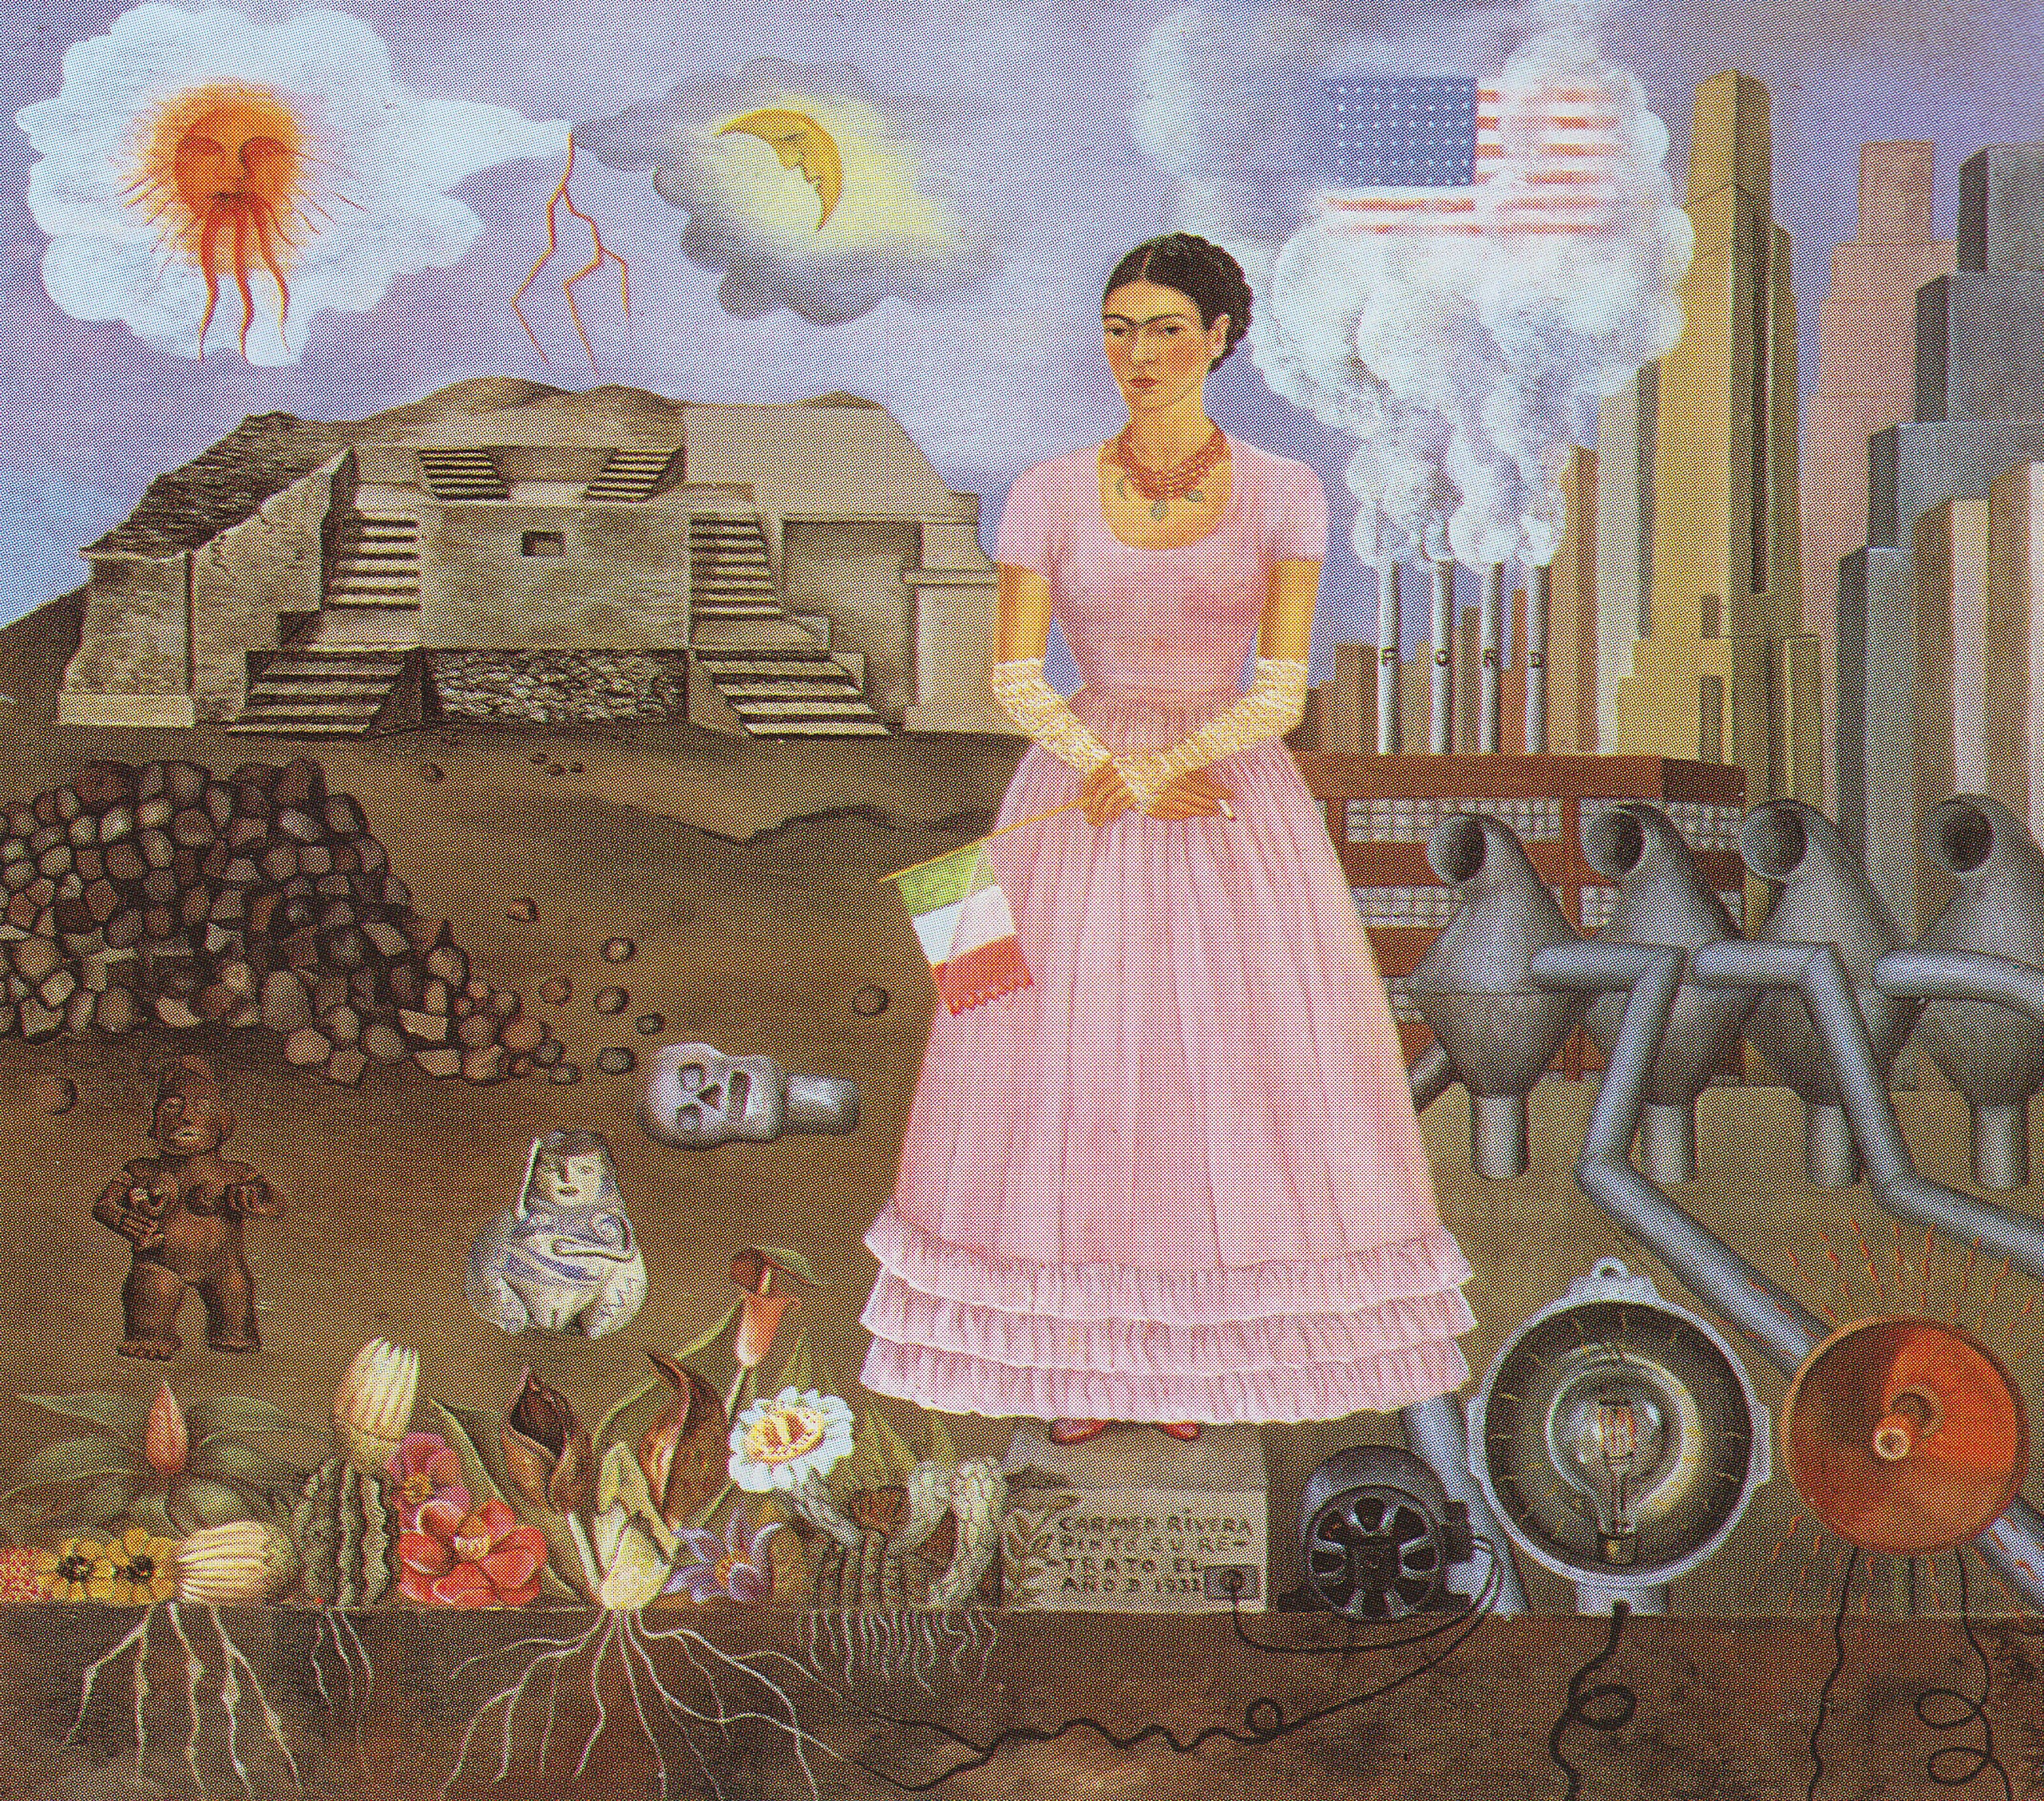 "Self-Portrait on the Borderline of United States and Mexico," Frieda Kahlo